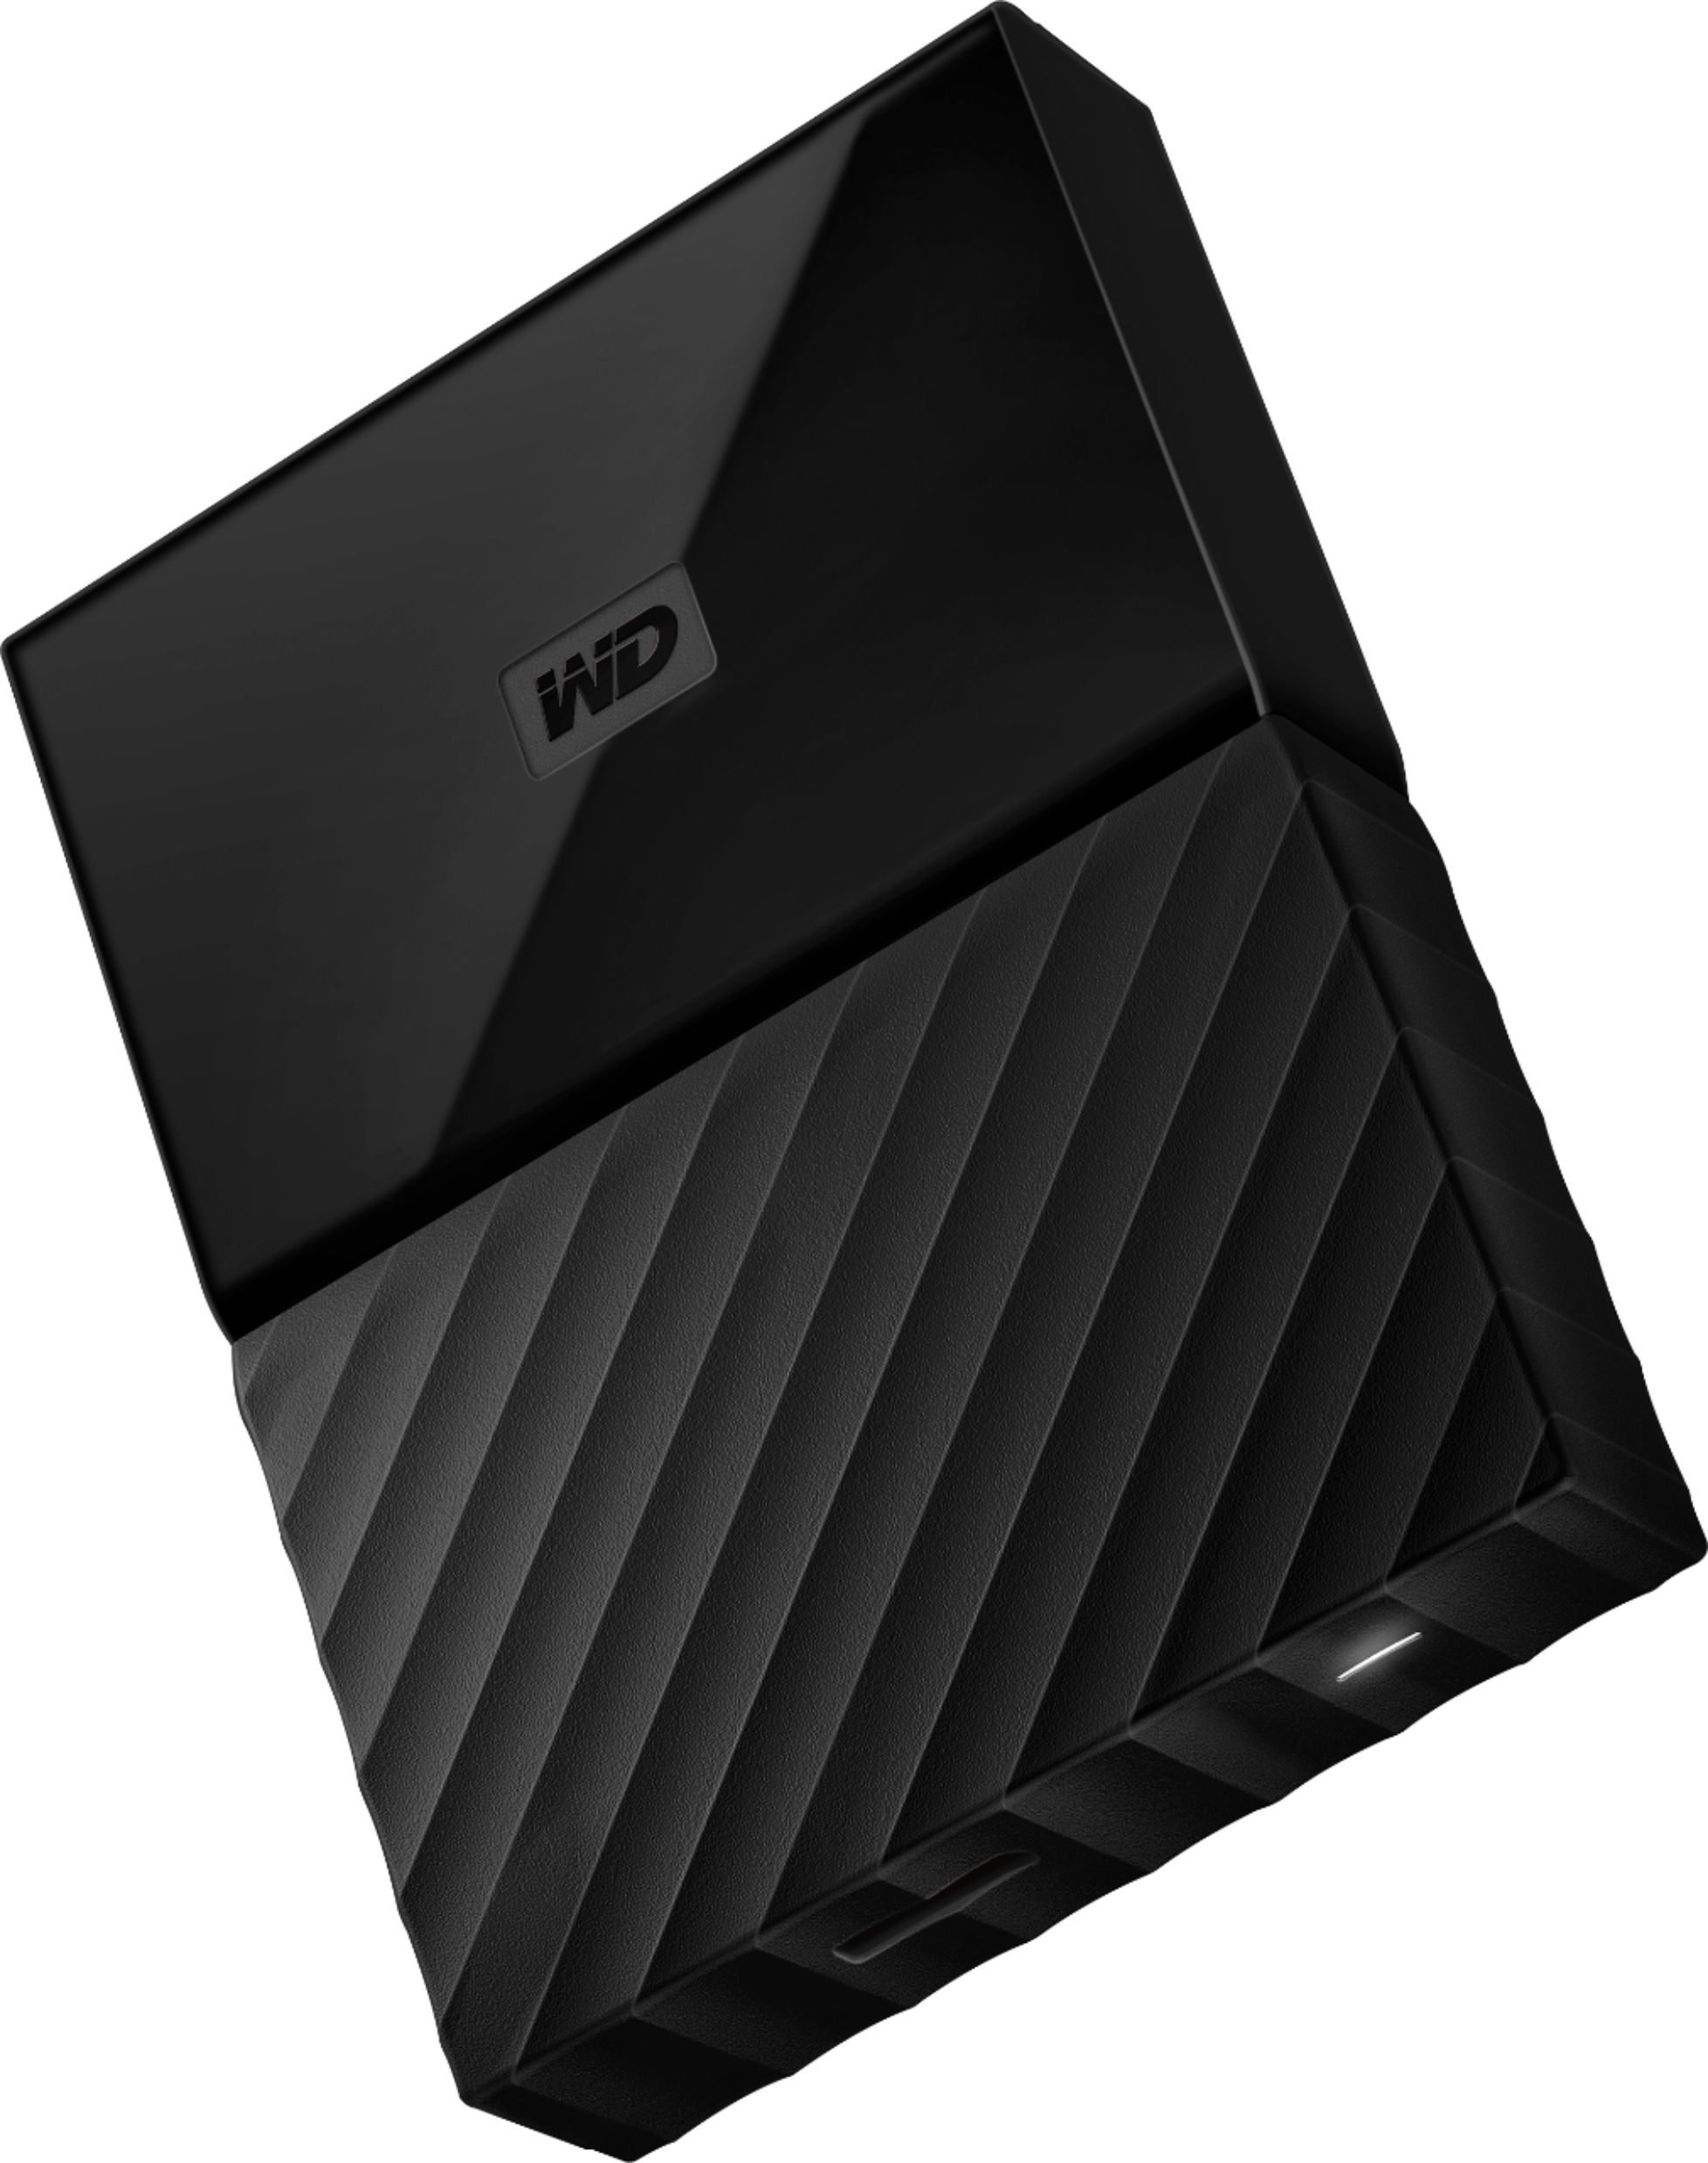 wd passport external hard drive for mac can be used in windows